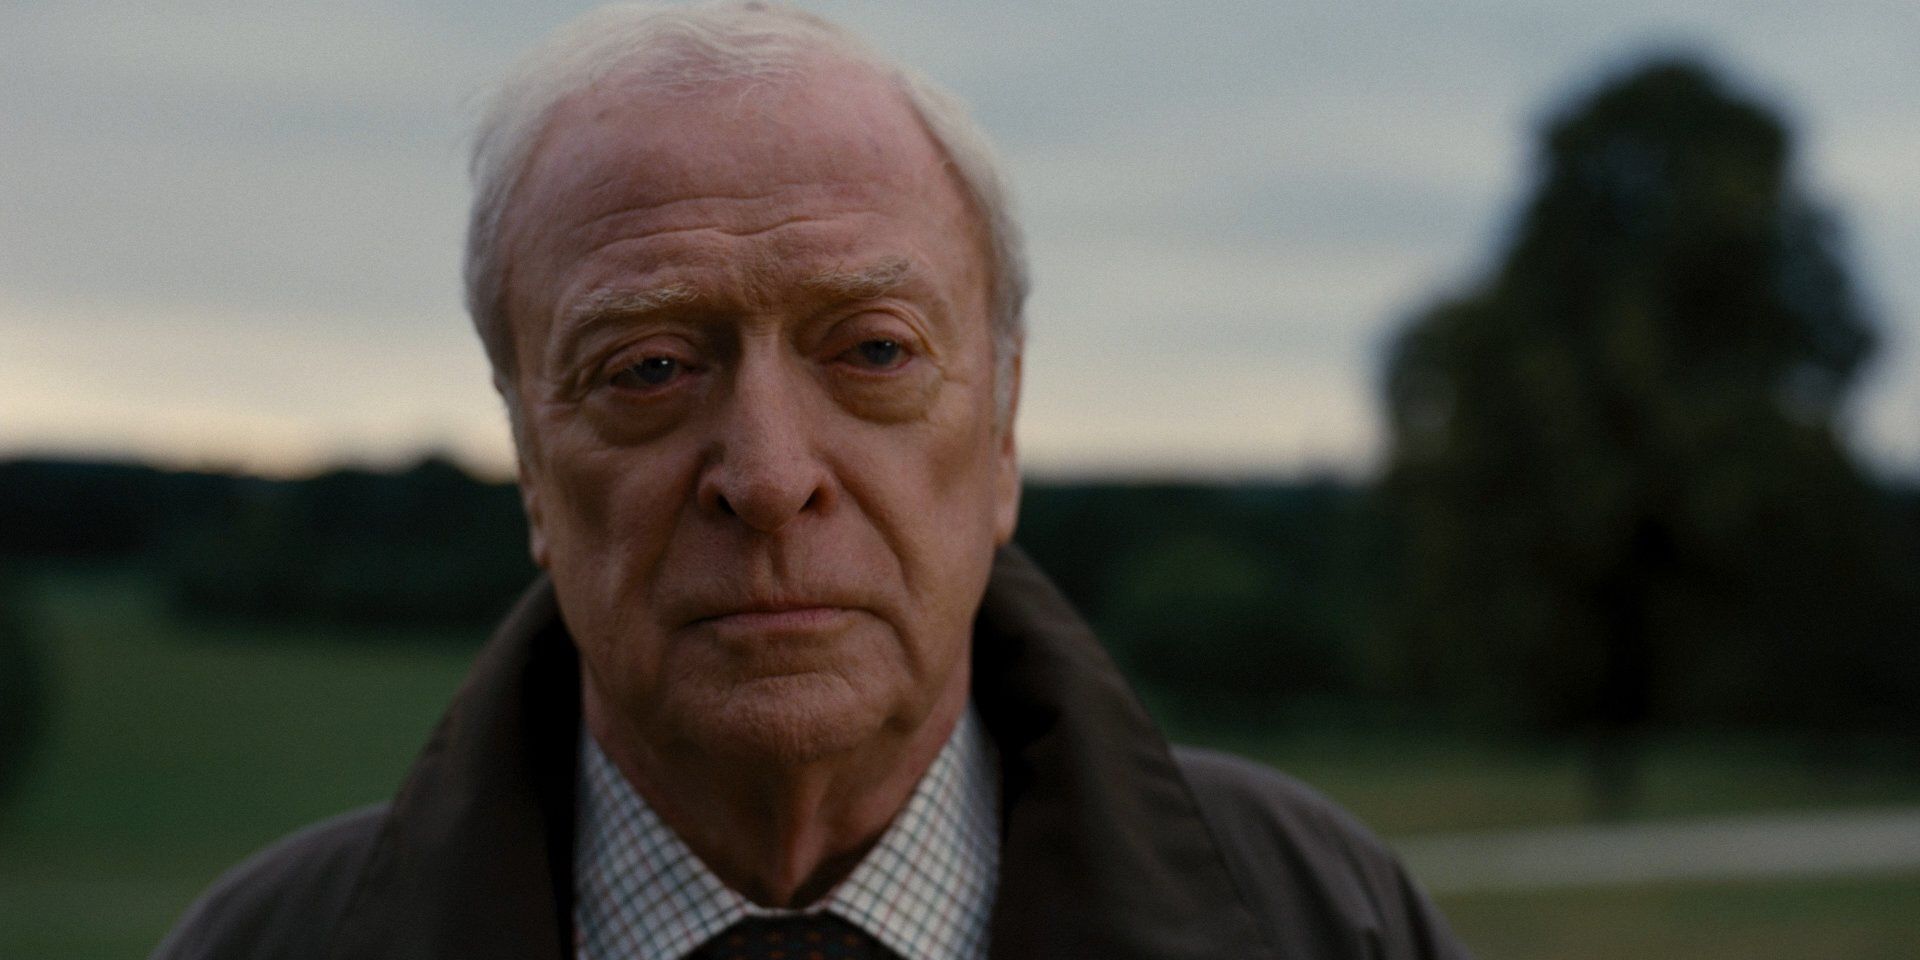 Michael Caine as Alfred, The Dark Knight trilogy